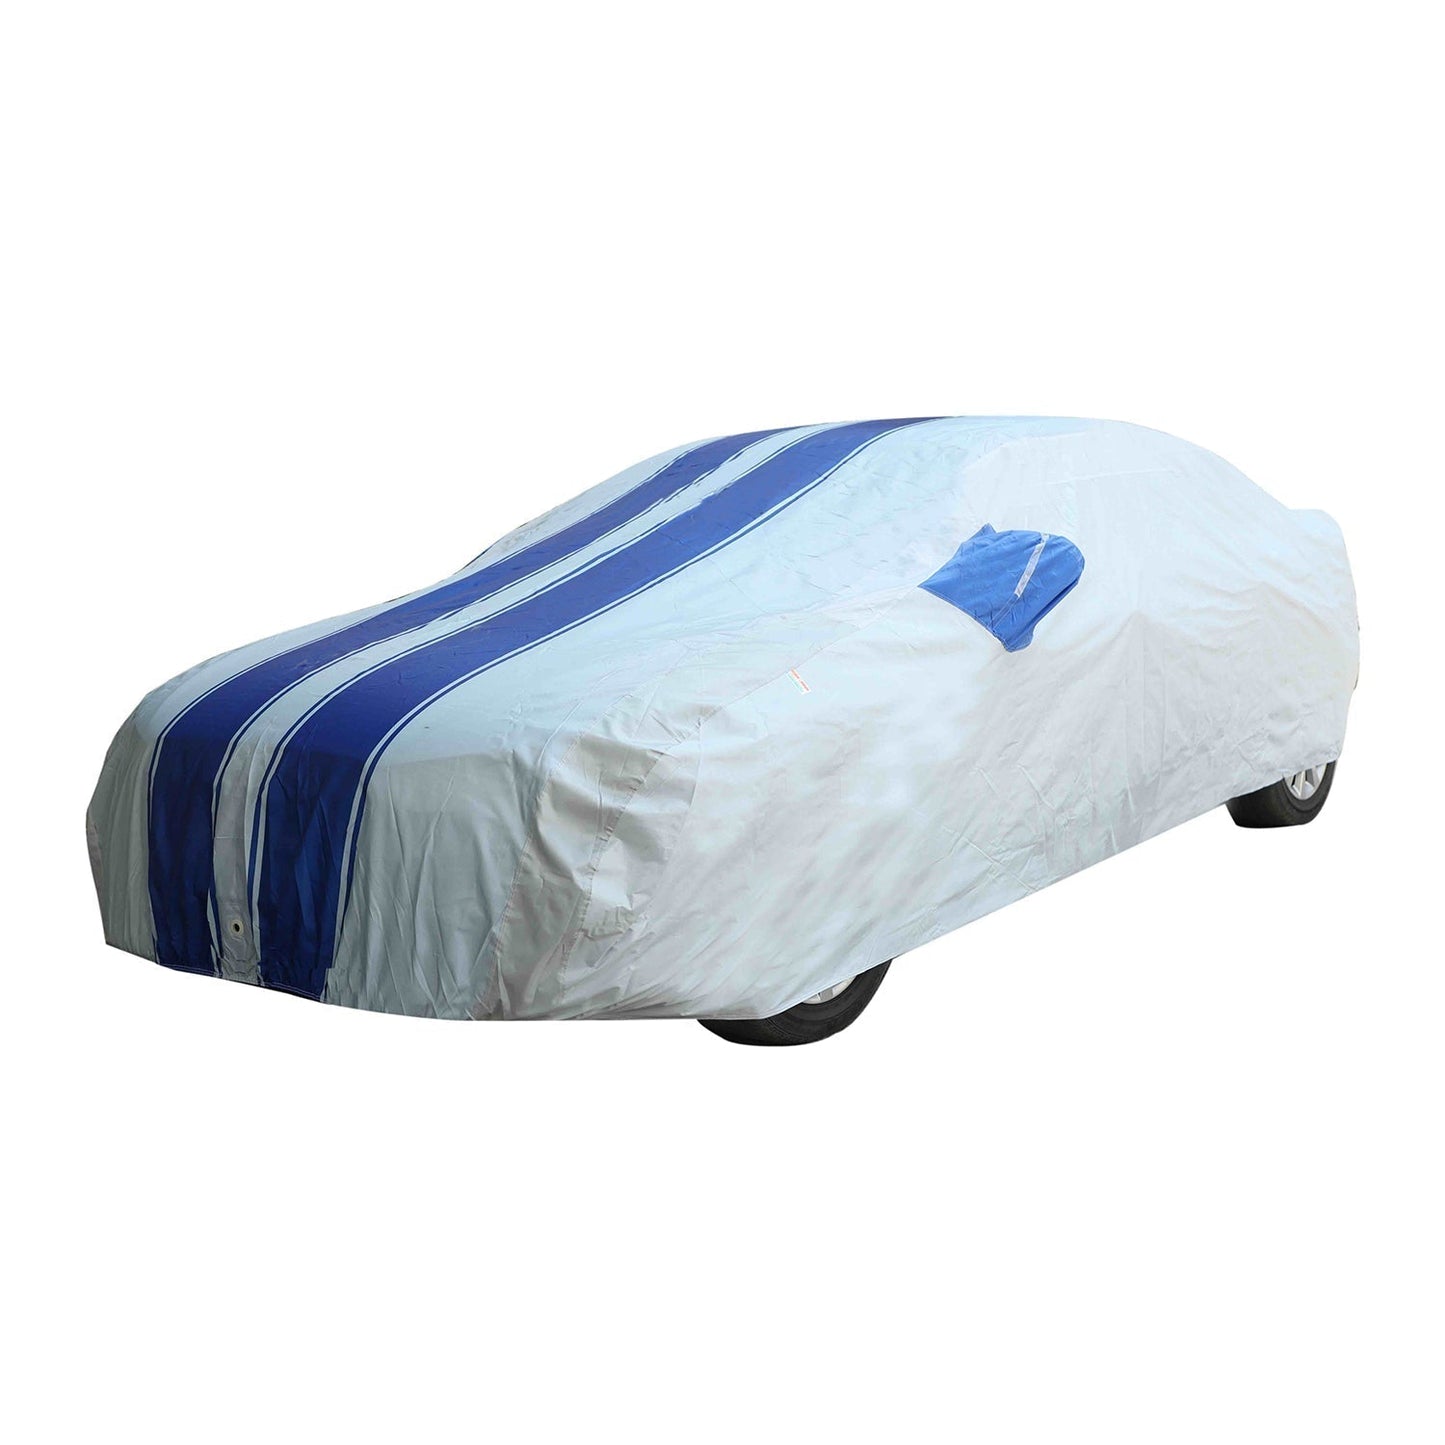 Oshotto 100% Blue dustproof and Water Resistant Car Body Cover with Mirror Pockets For KIA Sonet